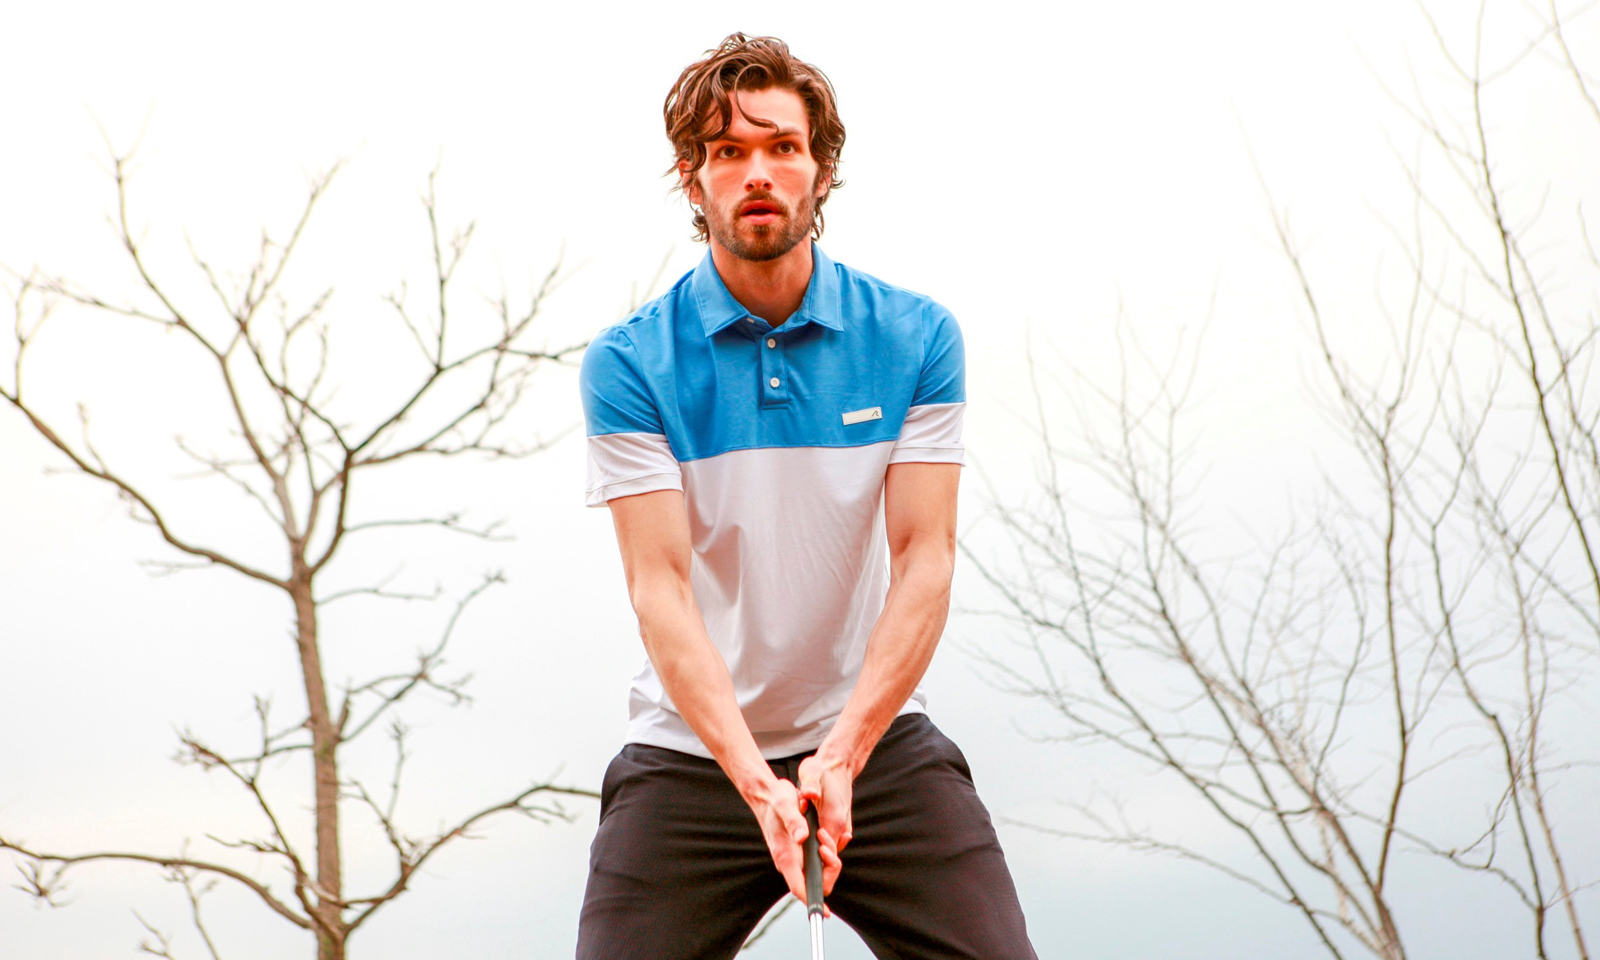 A round with Andrew Redvanly, the man behind New Jersey’s stylish performance wear brand for the modern athlete